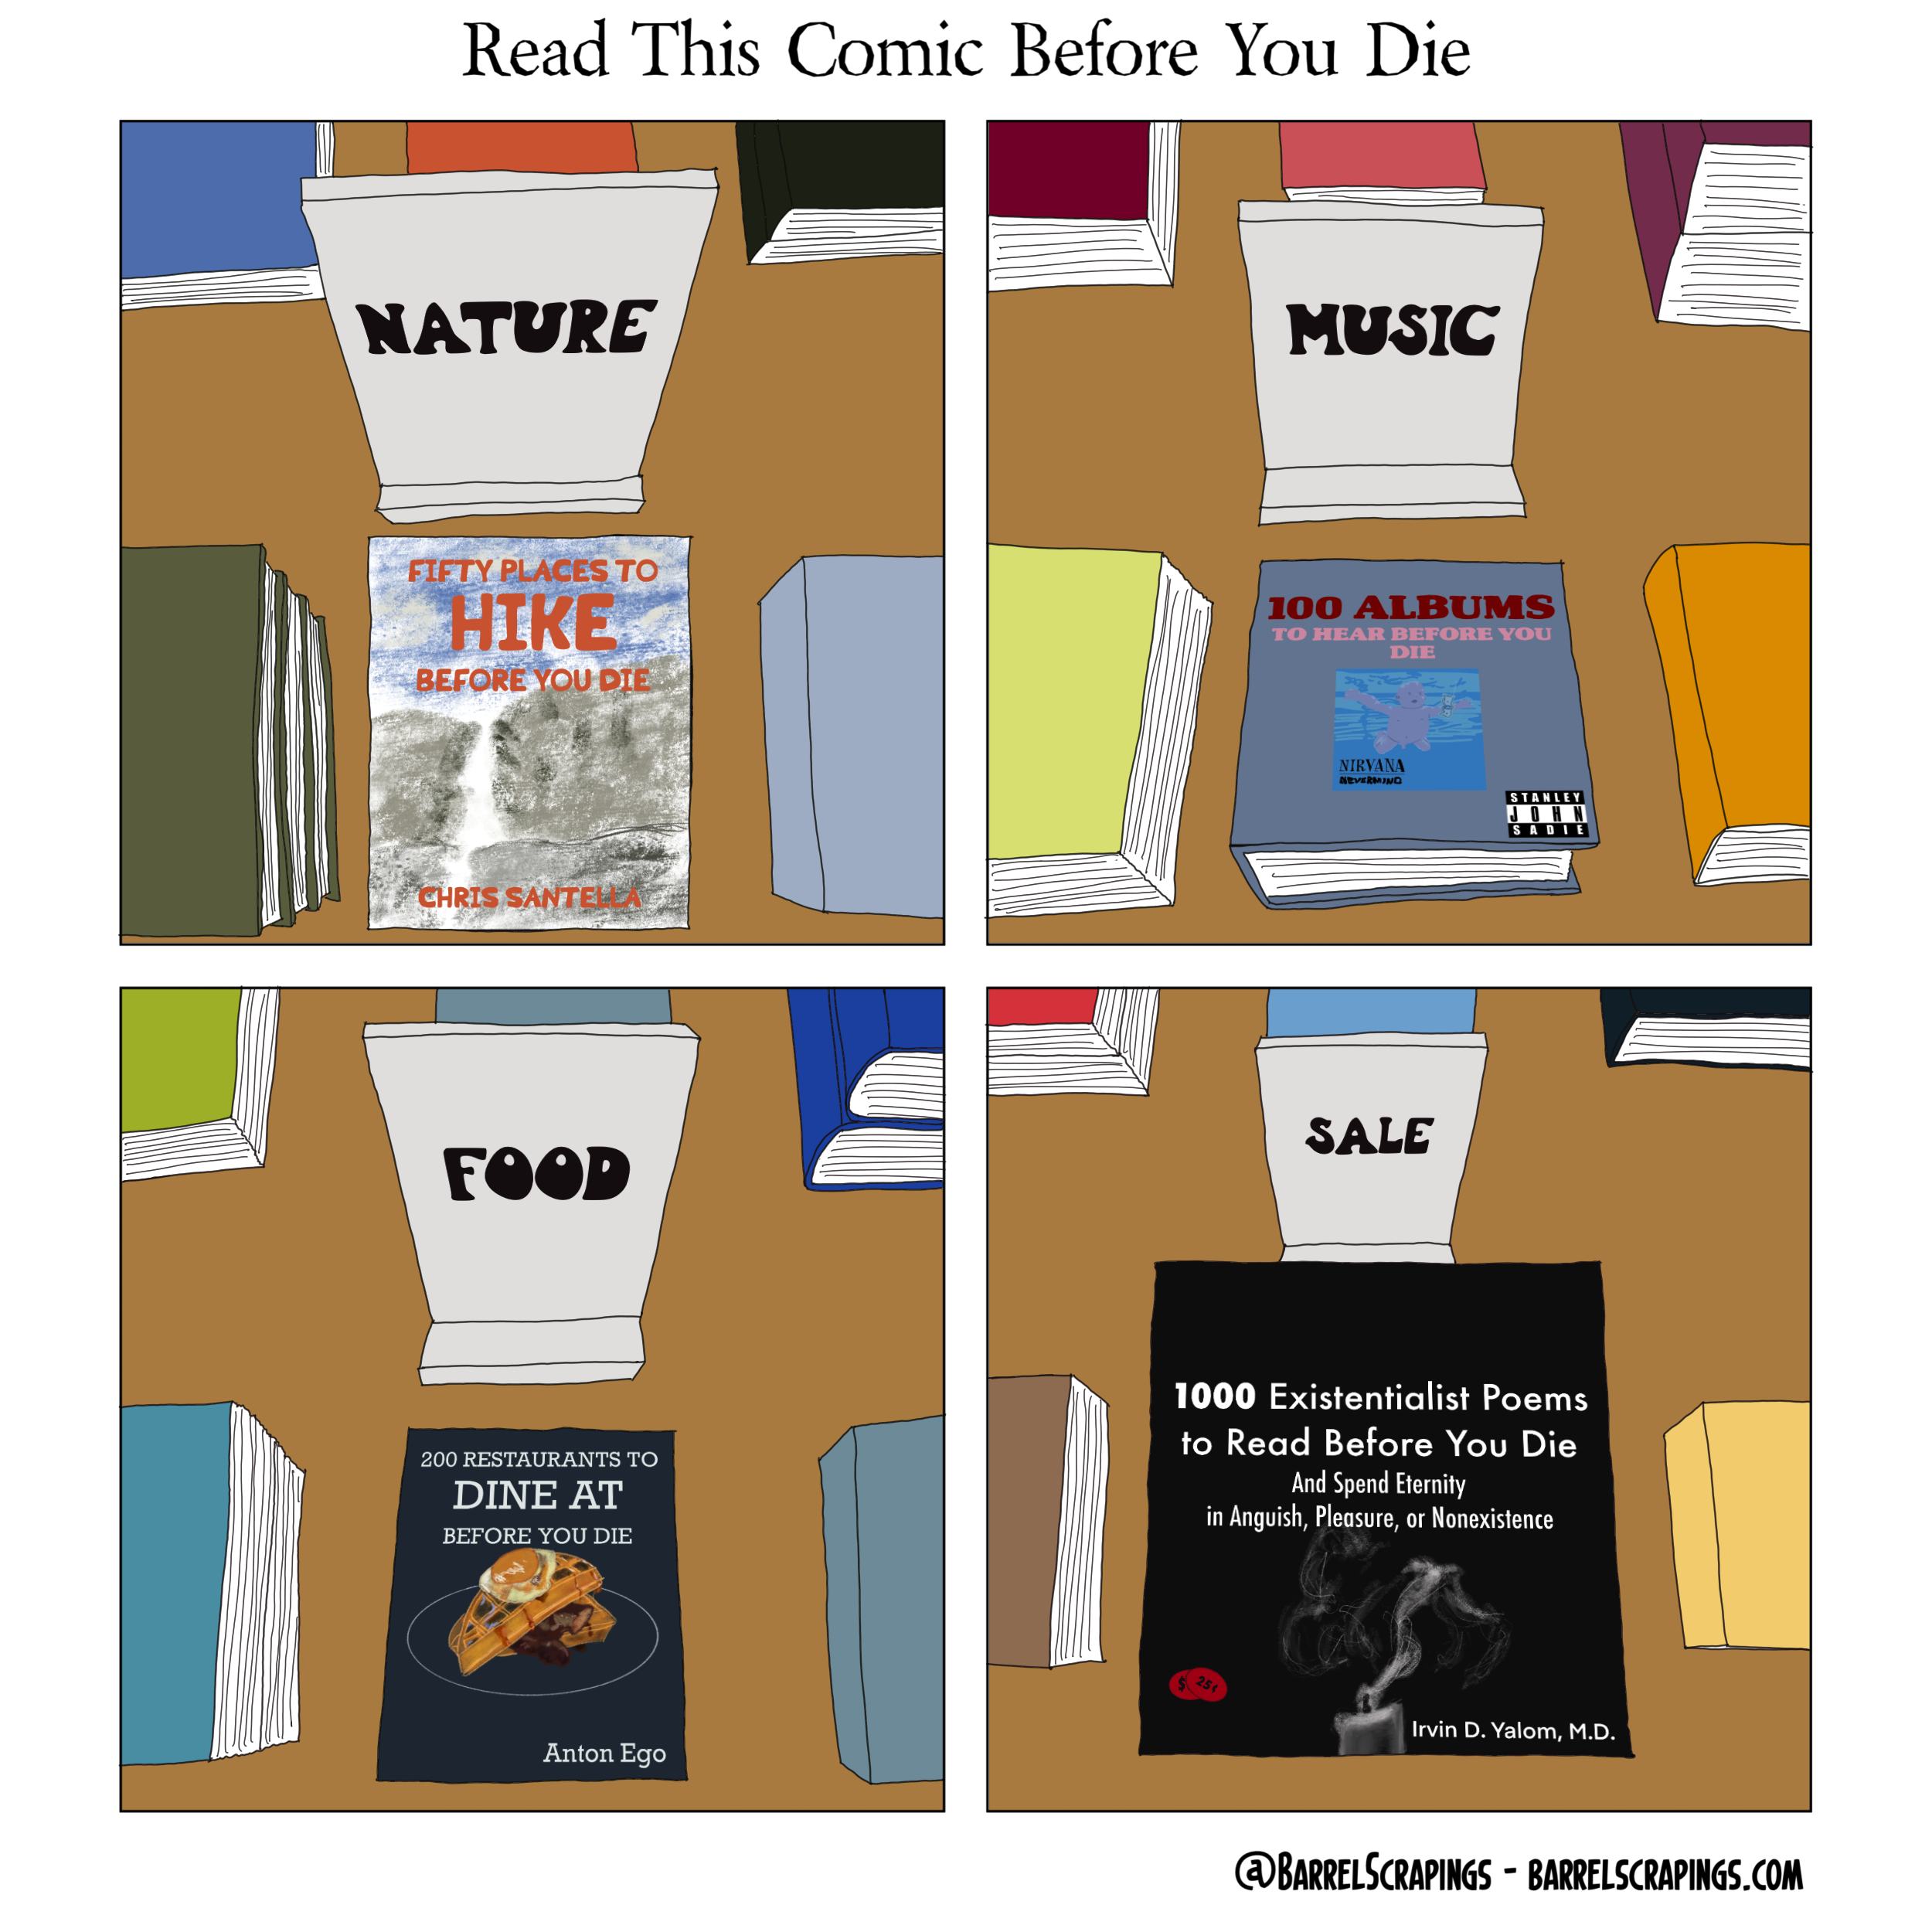 Four panels, displays in a bookstore with books  arrayed next to signs indicating the genre. Panel 1: "Nature". Book: "Fifty places to hike before you die". Panel 2: "Music". Book: "100 albums to hear before you die" with an image of Nirvana's Nevermind on the cover. Panel 3: "Food". Book: "200 restaurants to dine at before you die". Panel 4: "Sale". Book: "1000 existentialist poems to read before you die and spend eternity in anguish, pleasure, or nonexistence"